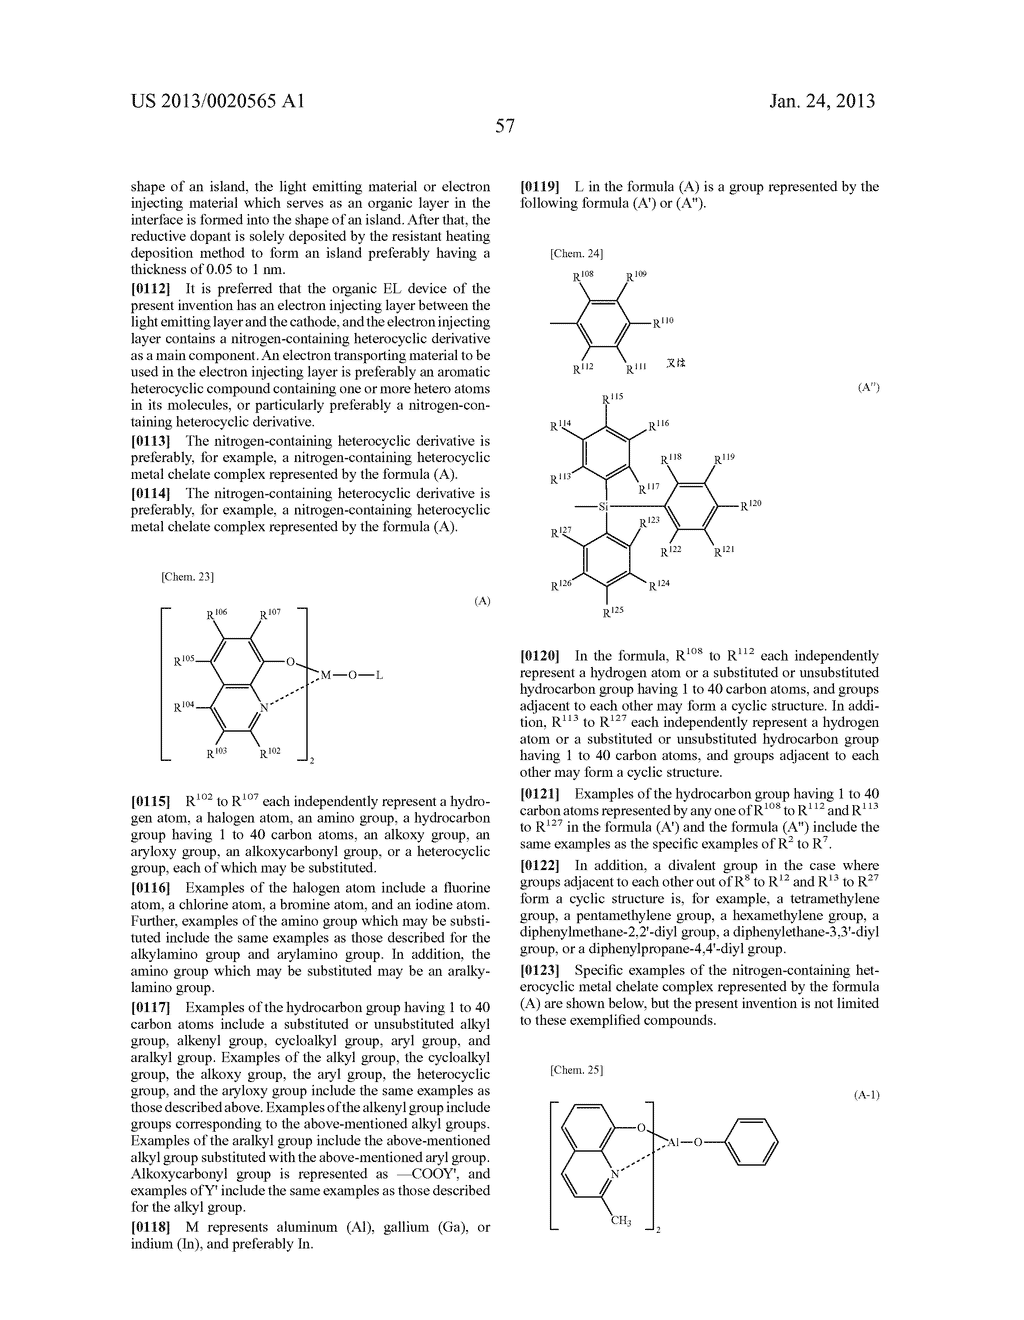 MATERIAL FOR ORGANIC ELECTROLUMINESCENT ELEMENT, AND ORGANIC     ELECTROLUMINESCENT ELEMENT USING SAME - diagram, schematic, and image 58